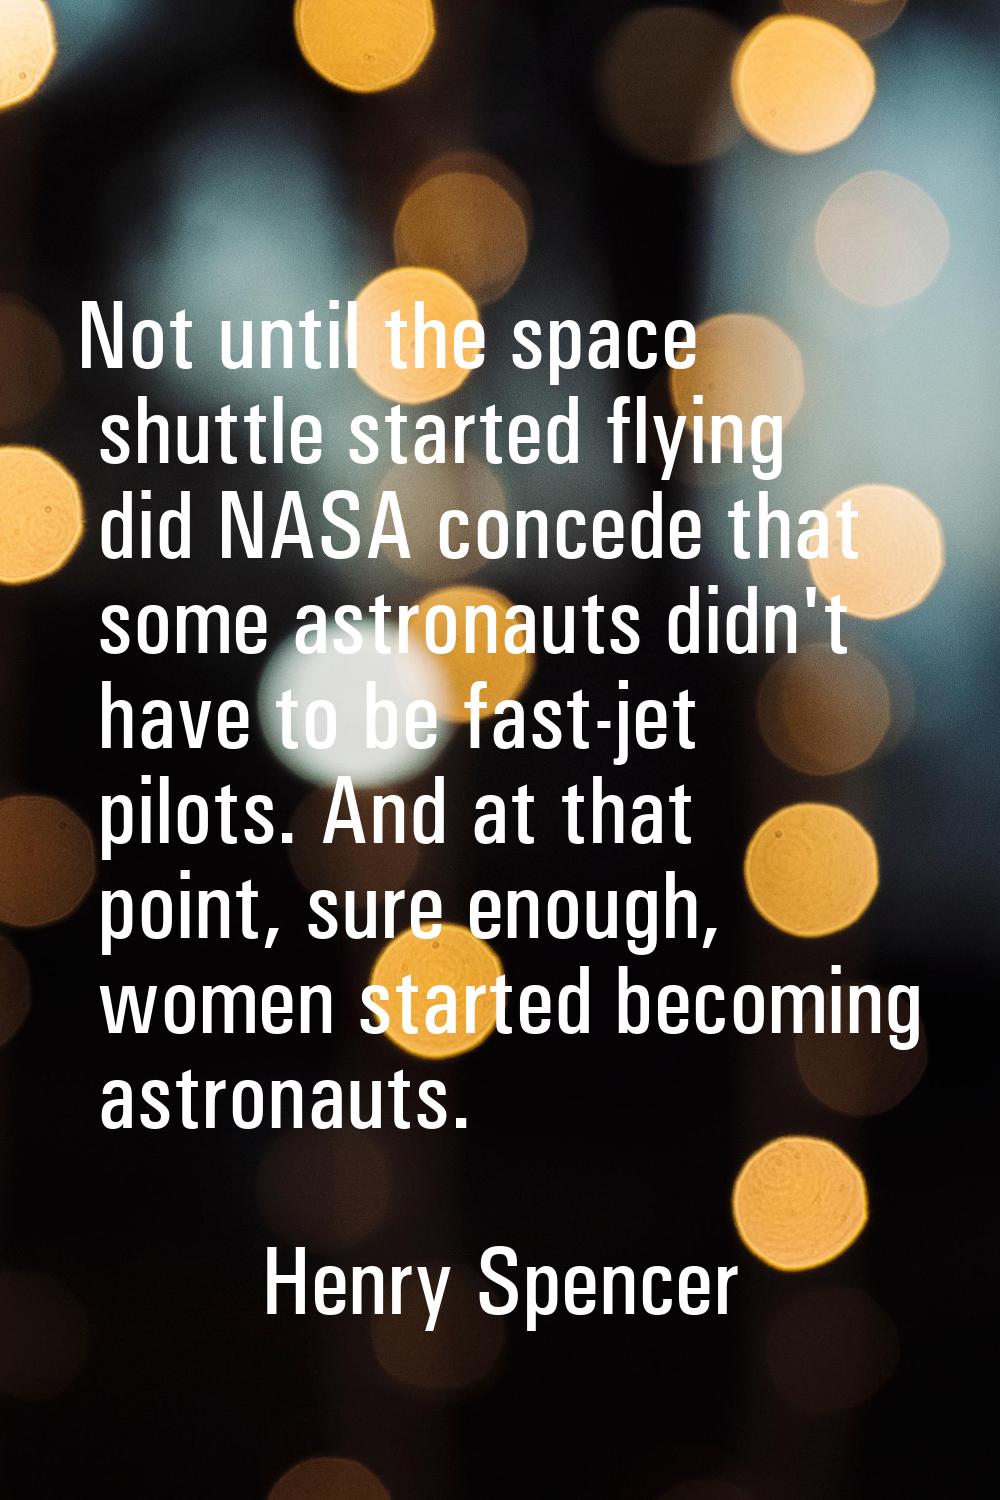 Not until the space shuttle started flying did NASA concede that some astronauts didn't have to be 